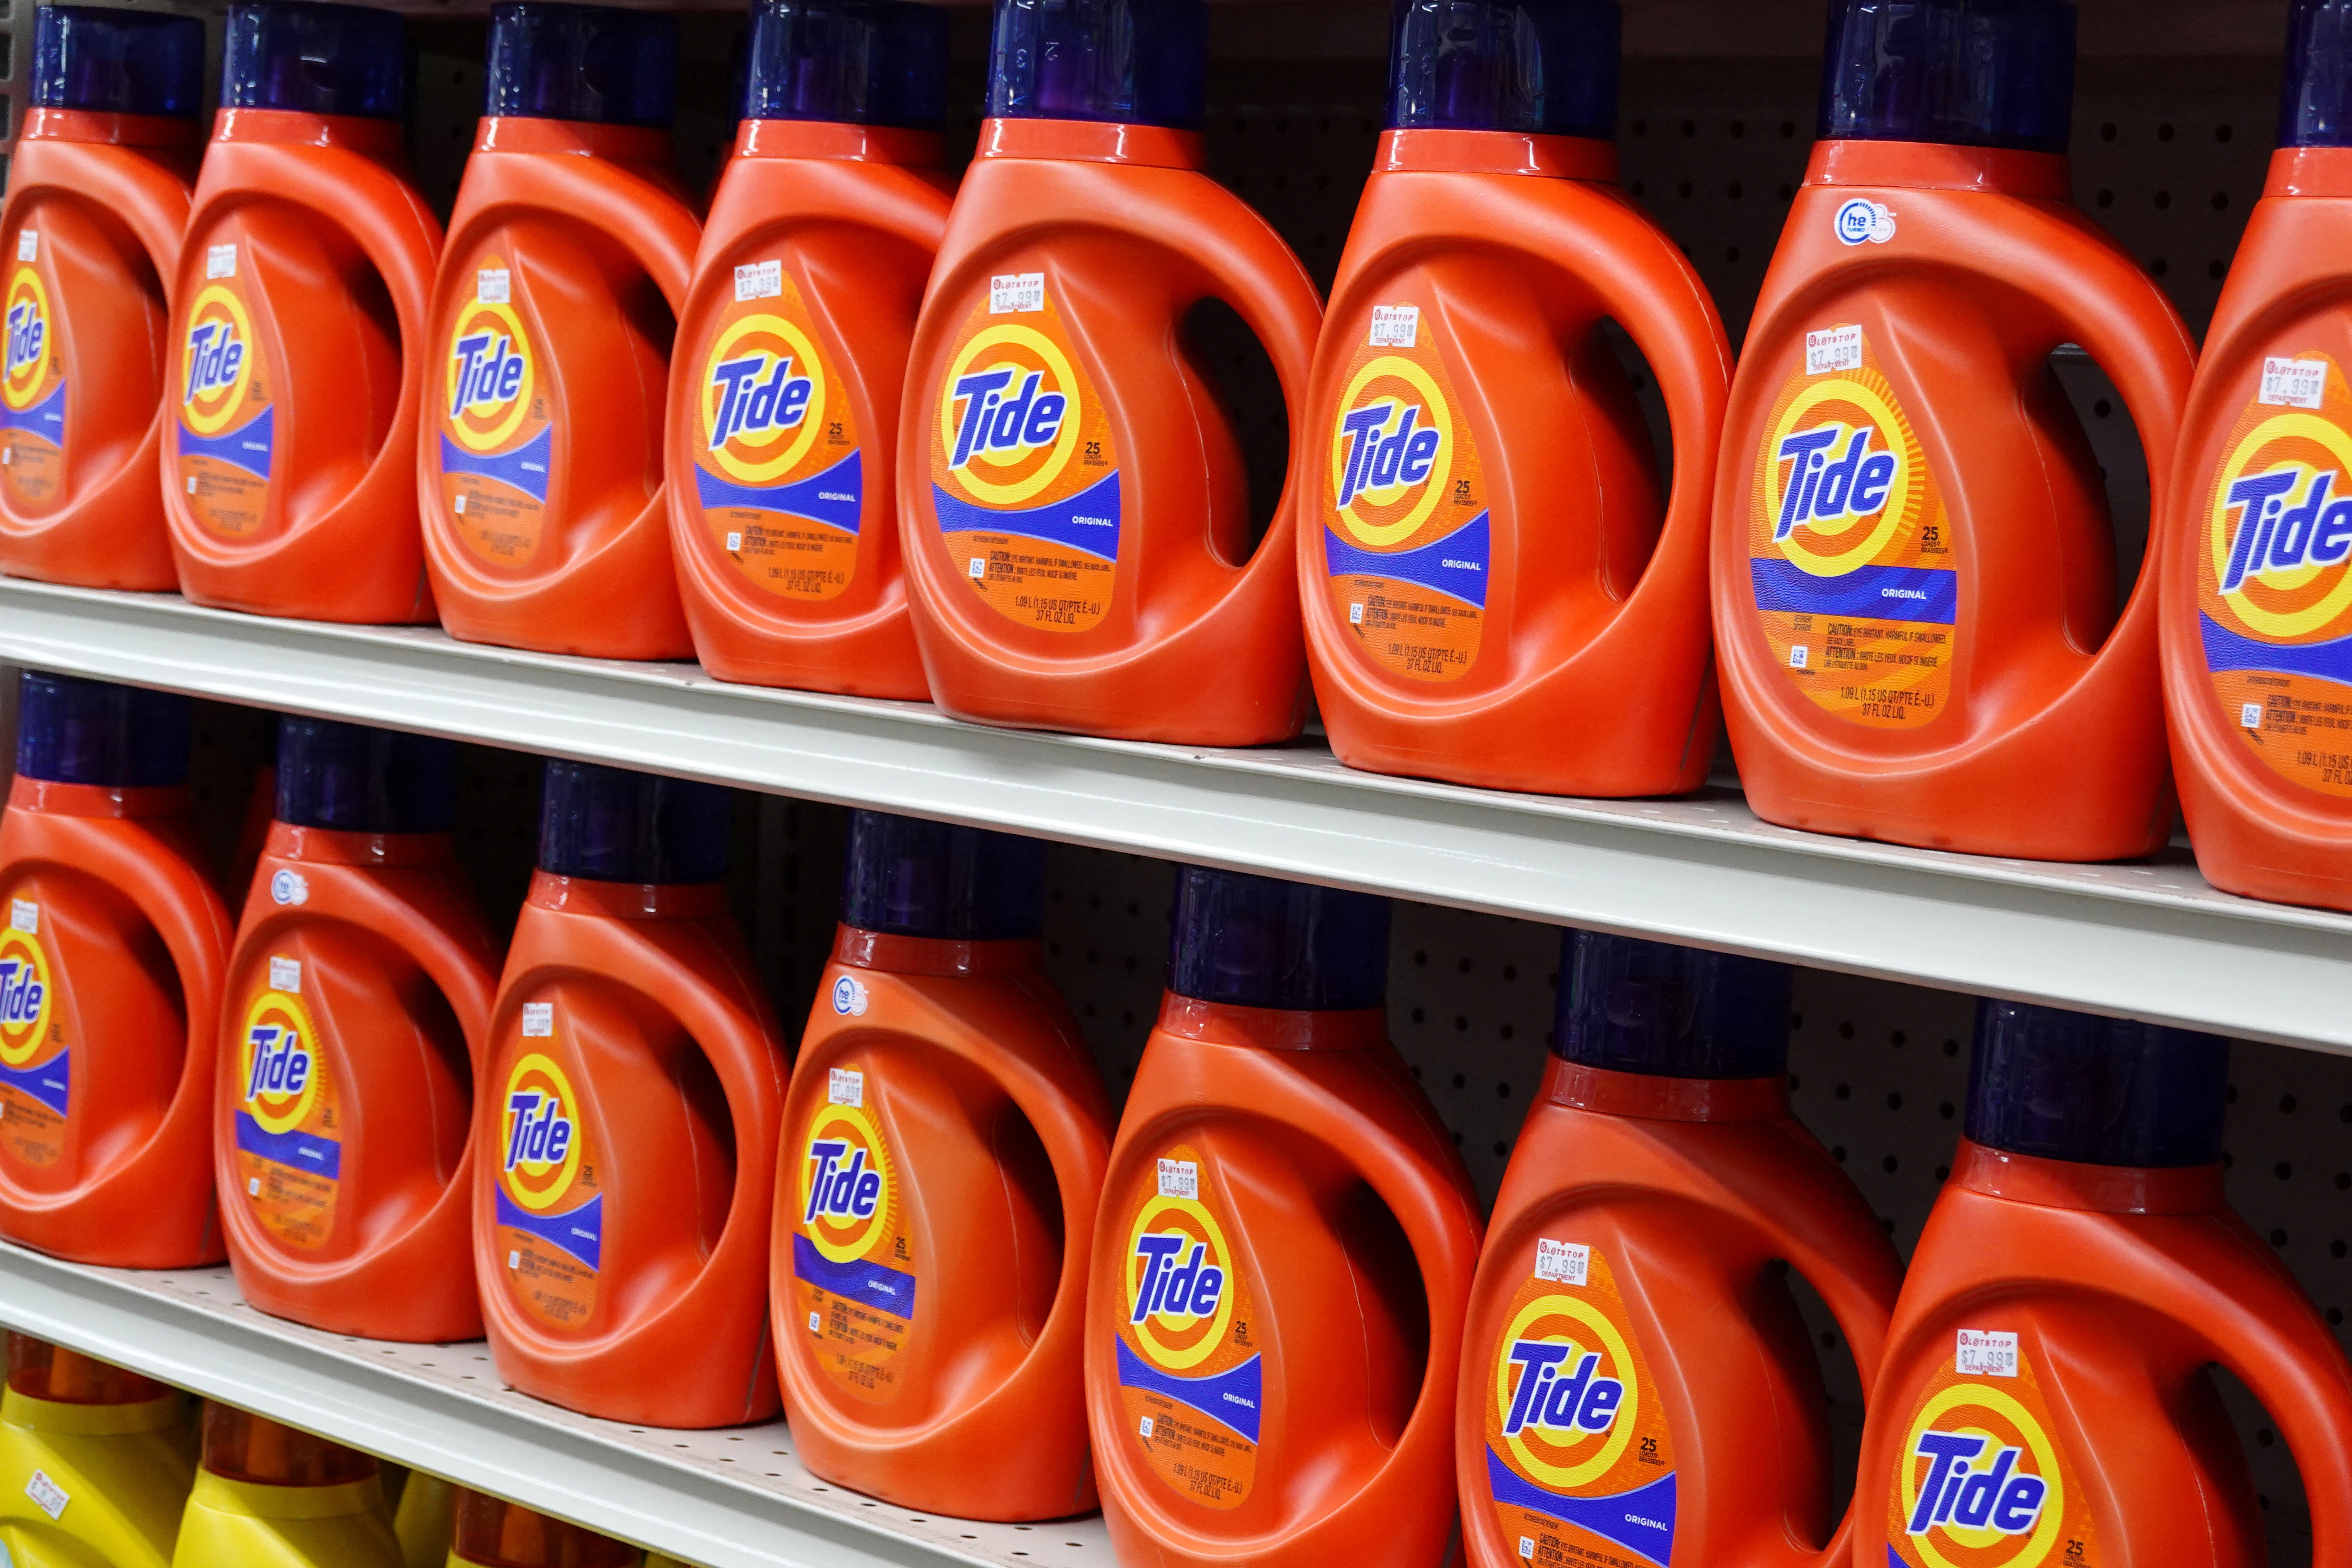 Tide detergent, a Procter & Gamble brand, is seen being sold in a store in Manhattan, New York City.